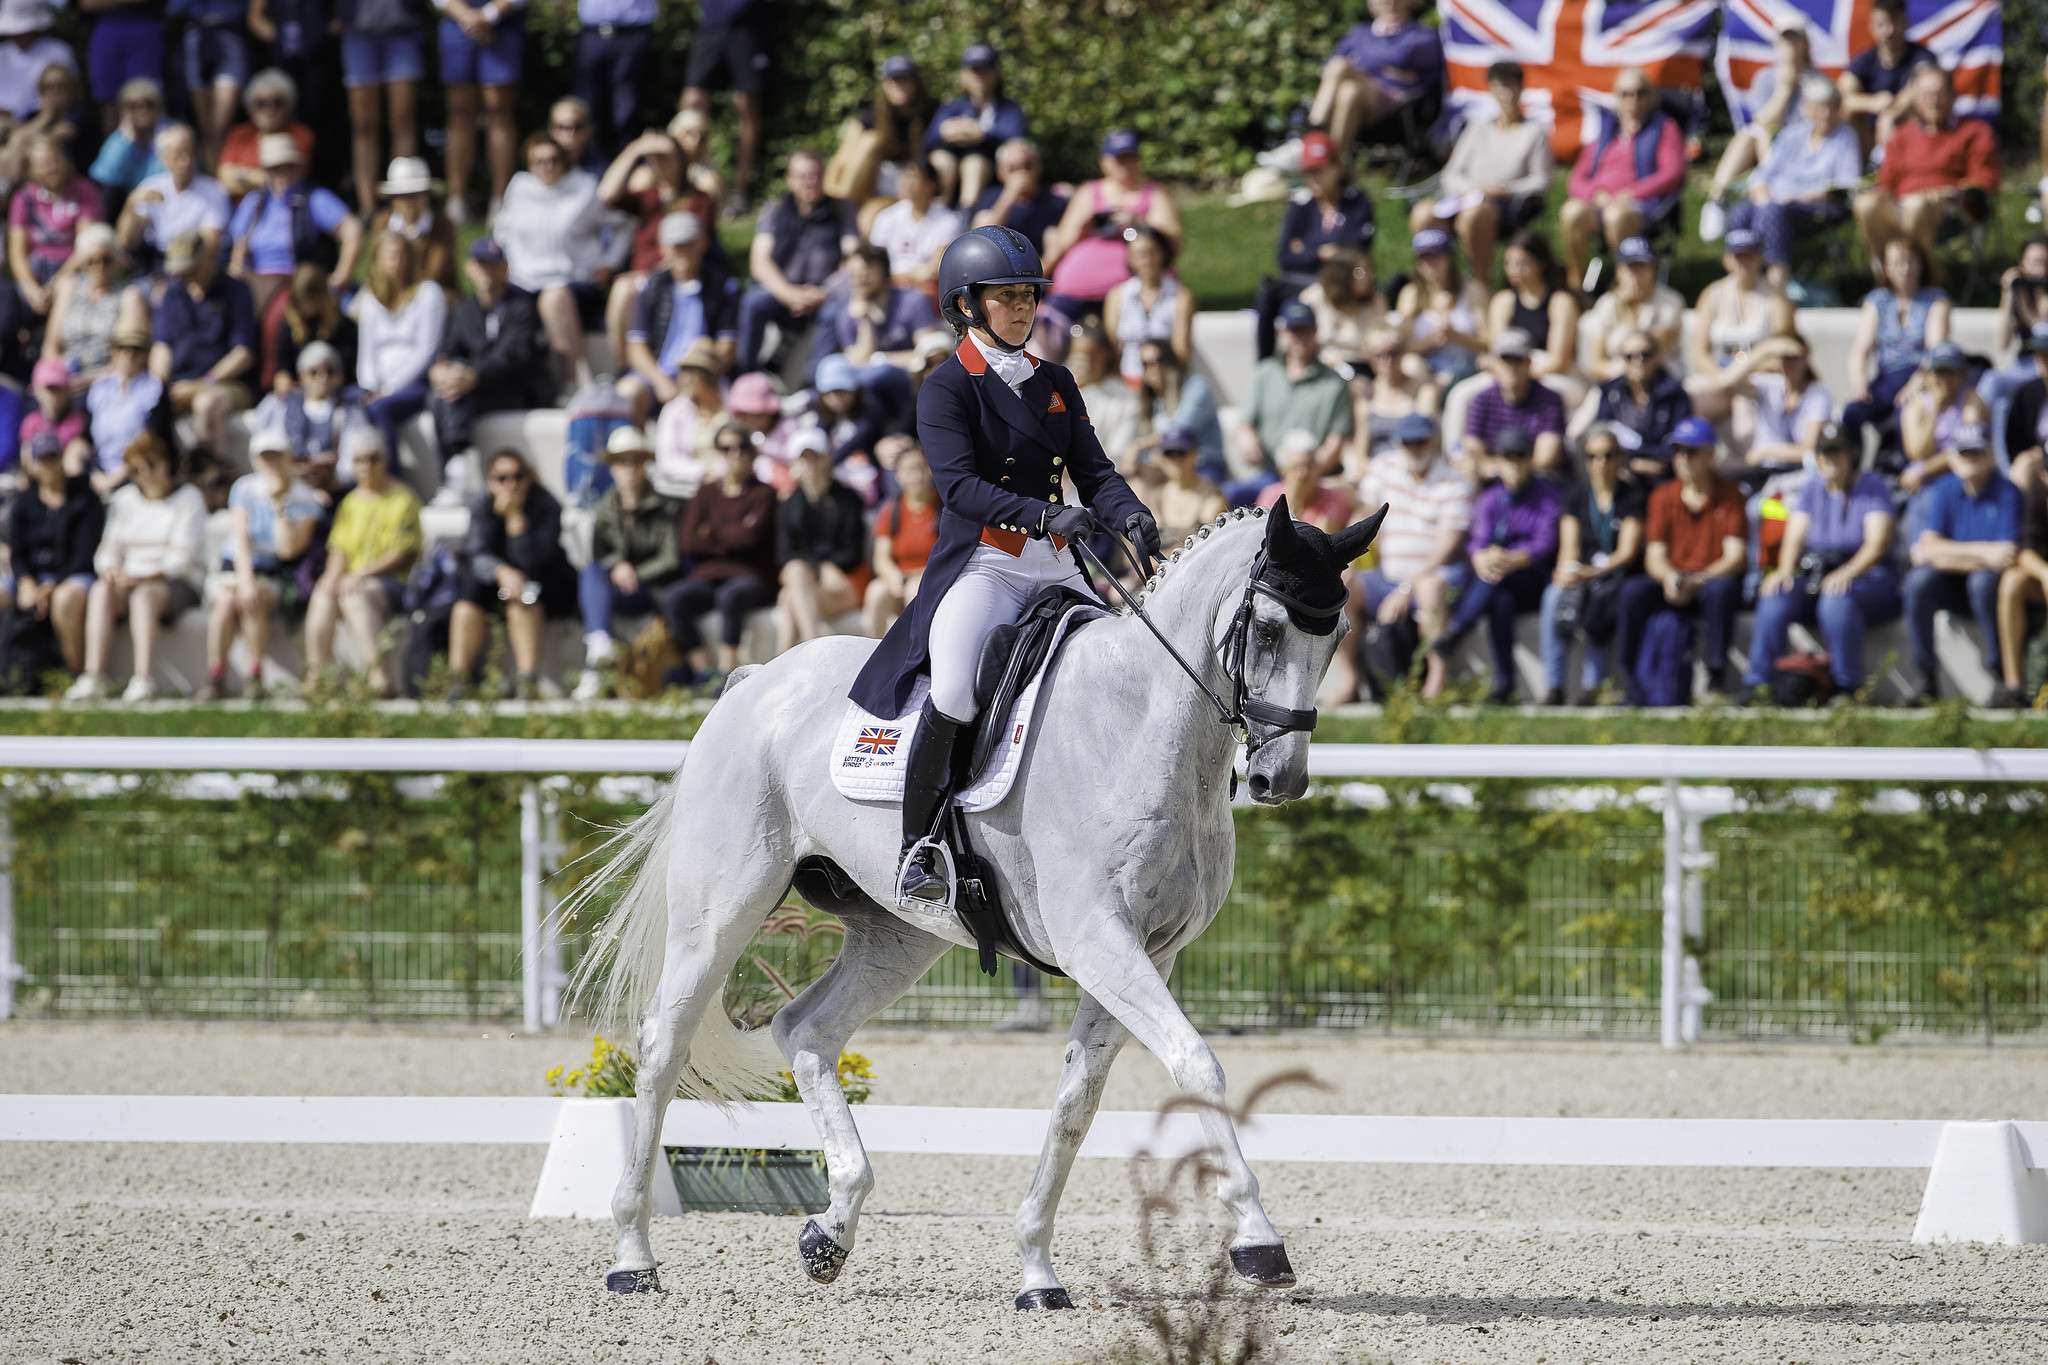 GBR-Kitty King rides Vendredi Biats during the first day of dressage. 2023 FRA-FEI Eventing European Championships | Haras du Pin, France. Thursday 10 August 2023. Copyright Photo: FEI/Libby Law Photography